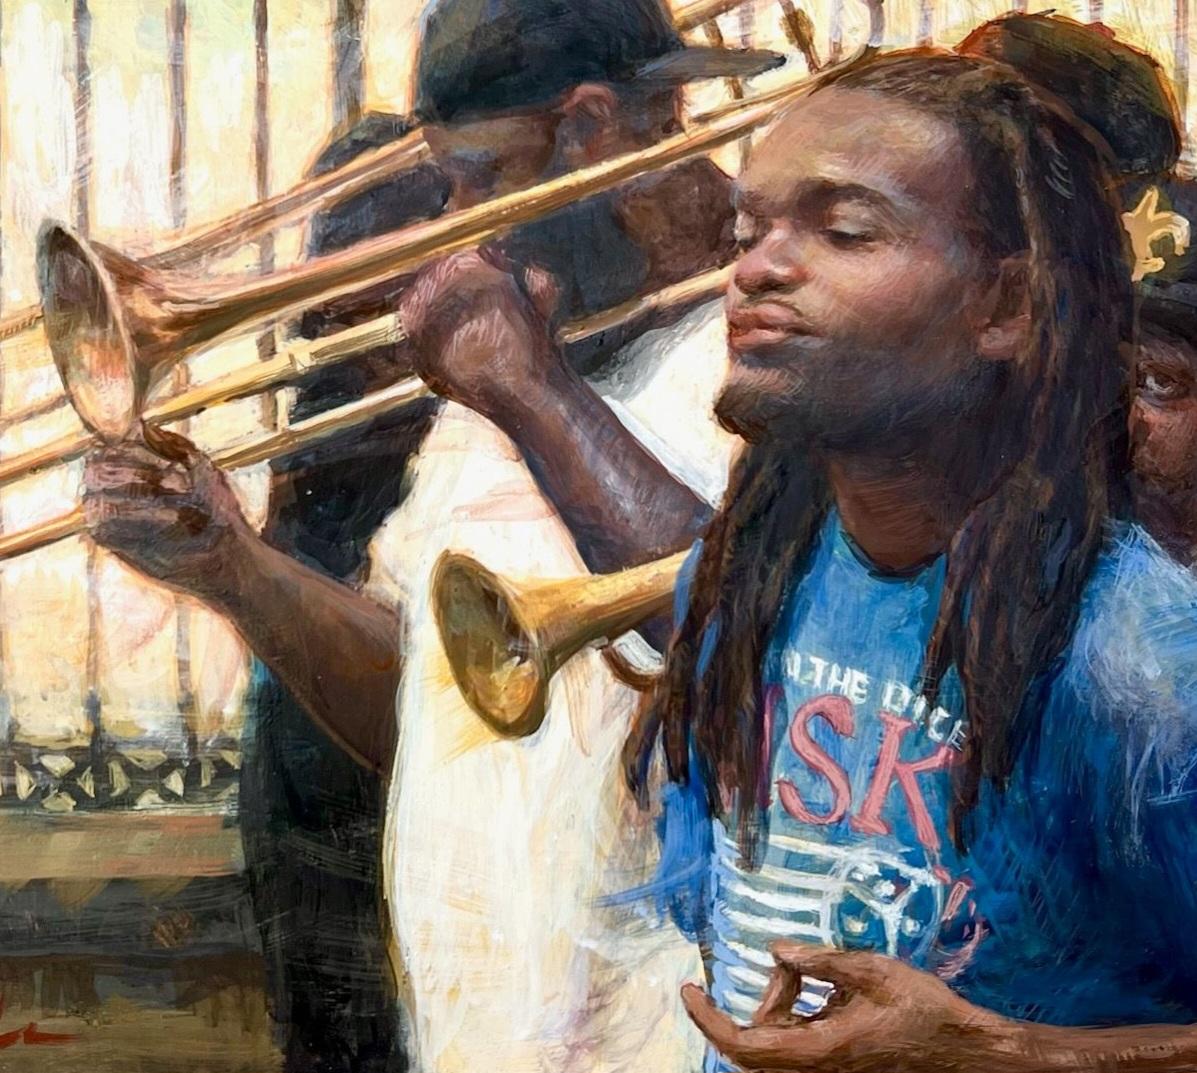 While walking in Jackson Square in New Orleans, you can't help but hear the trumpets and trombones of the Jackson Street band that spends their time entertaining the tourists and locals alike. Setting up on the square to paint, Melinda captured the